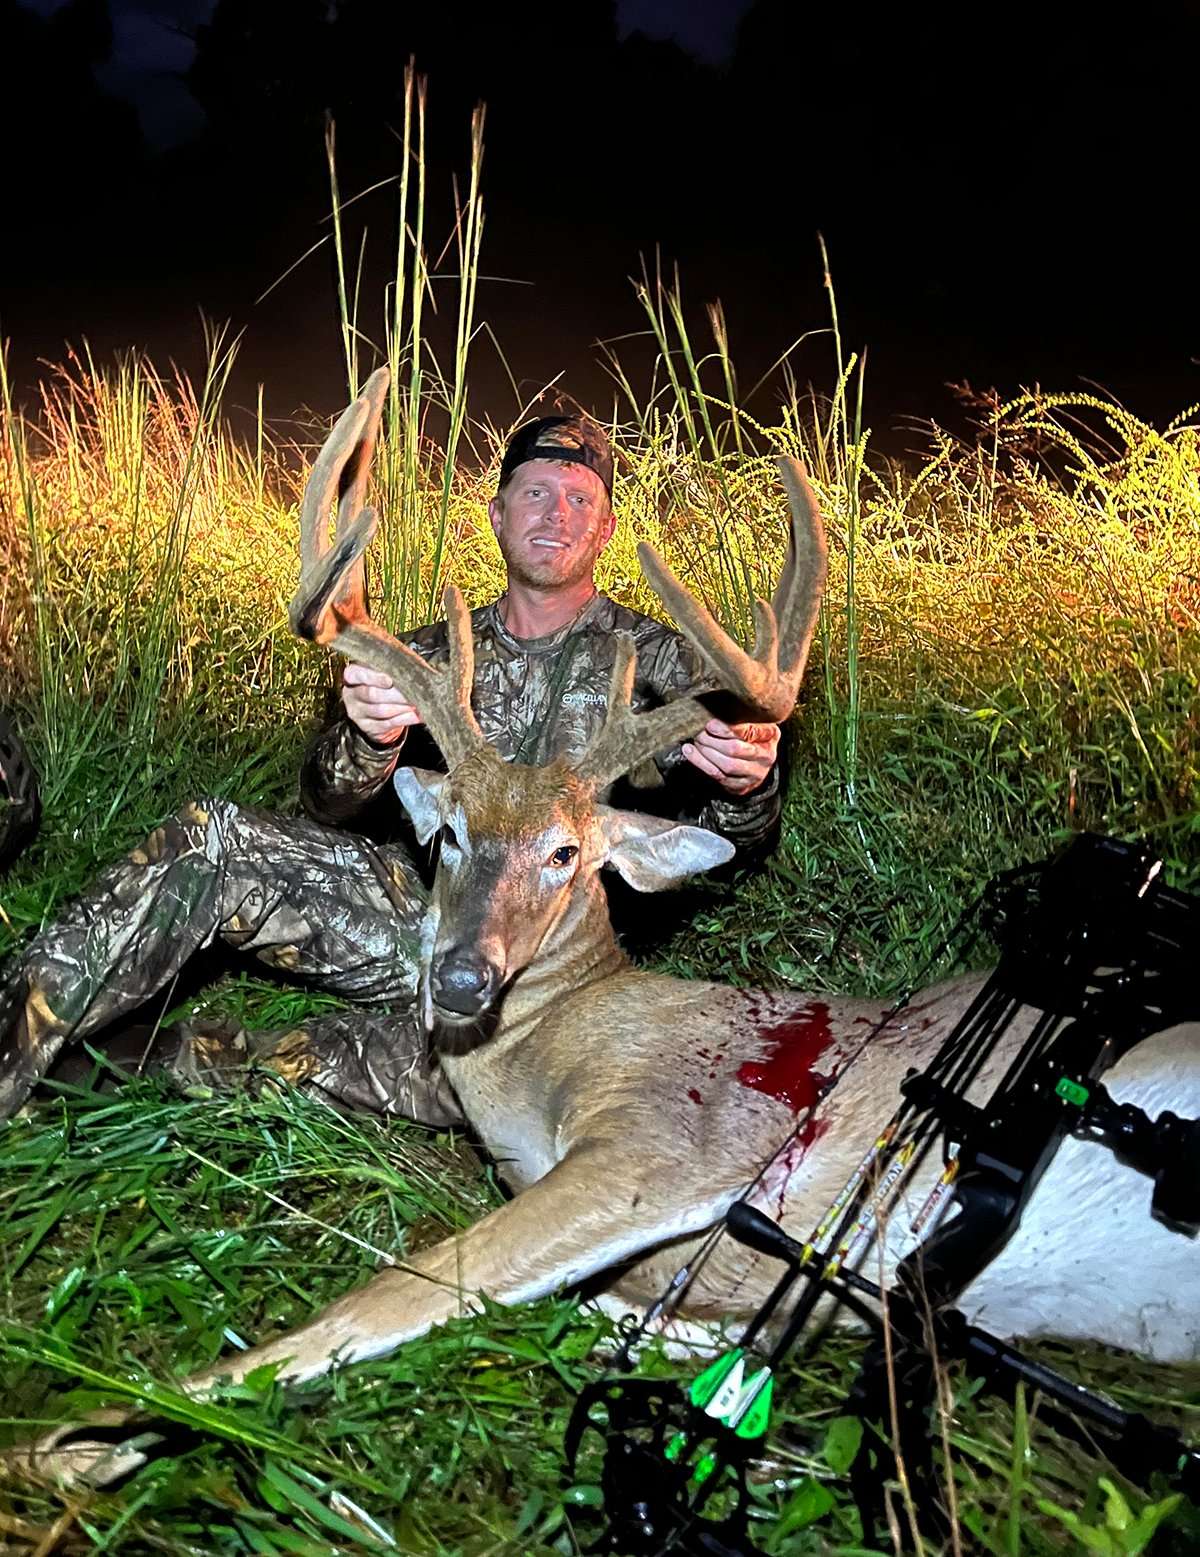 Langley made the forty yard shot with his Mathews VXR and watched the buck go down.